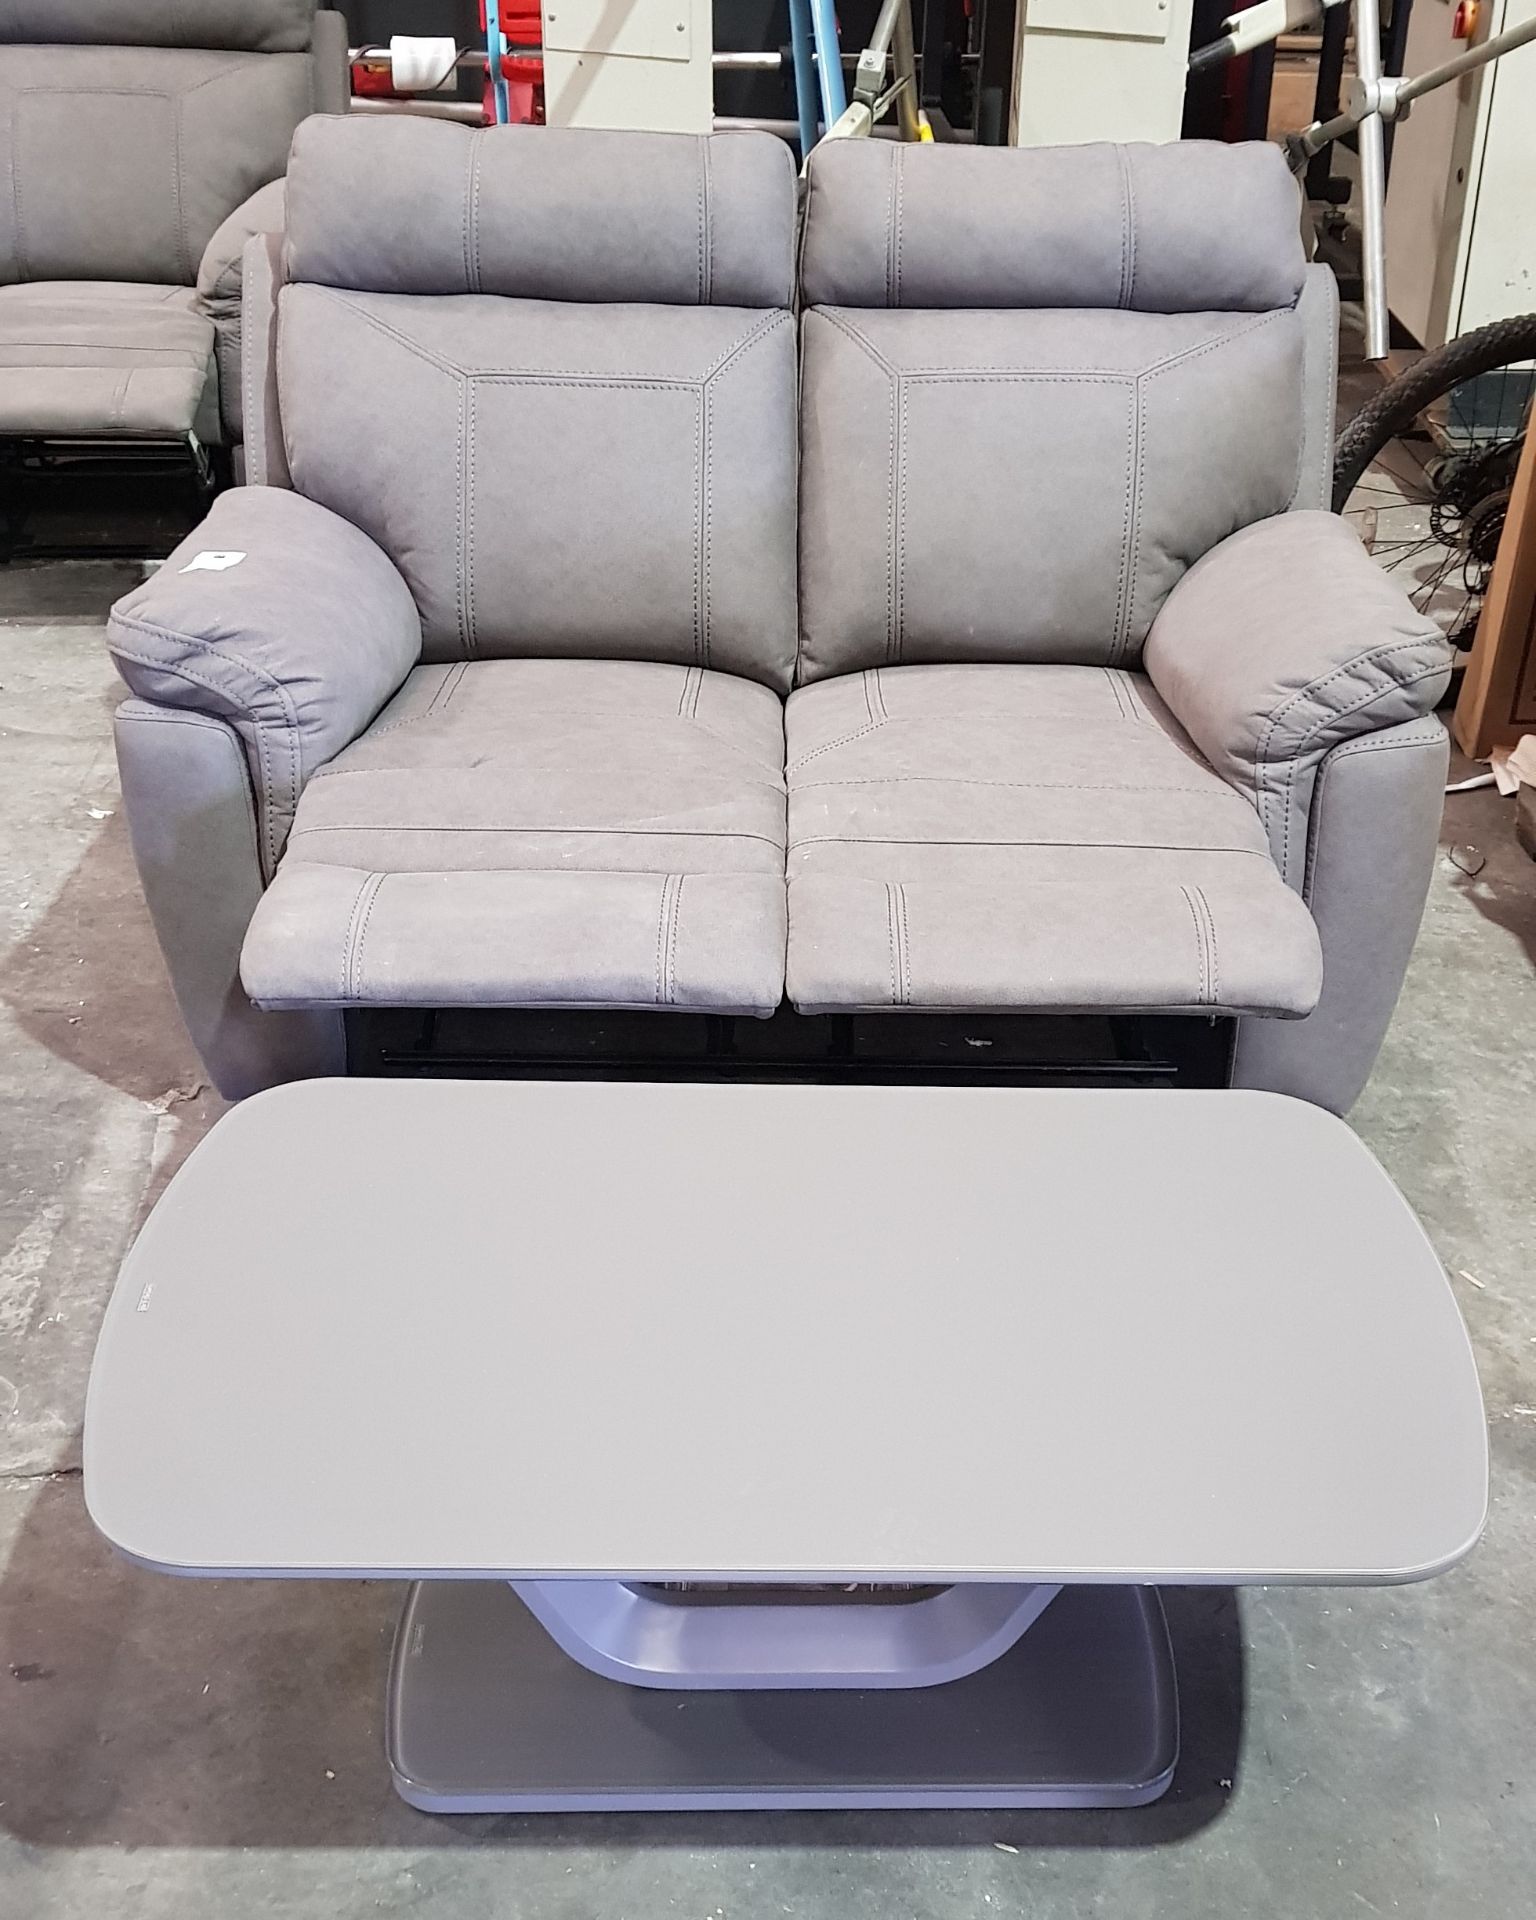 1 X 2 SEATER SUEDE STYLE RECLINER SOFA IN GREY - WITH GREY LAZZARO COFFEE TABLE - CUSTOMER RETRURNS